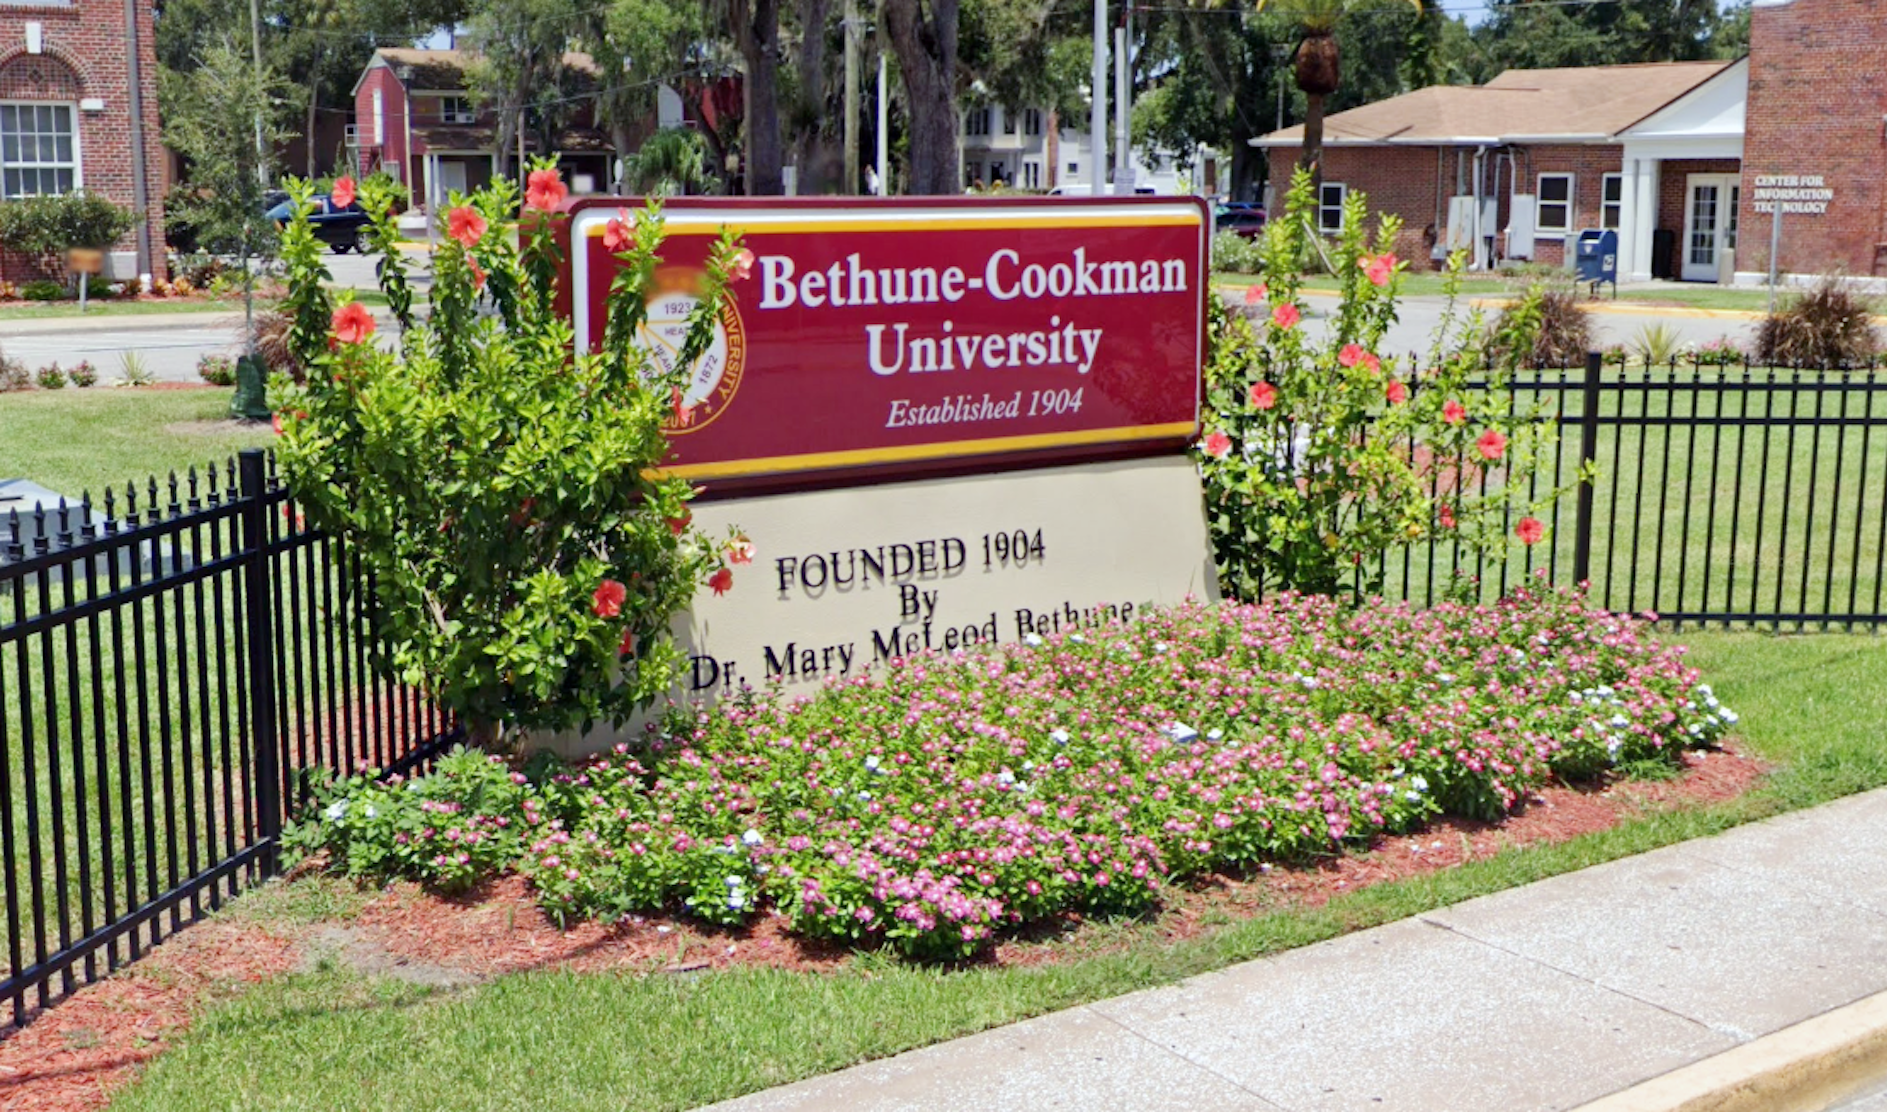 Federally backed loan helps BethuneCookman University end disastrous